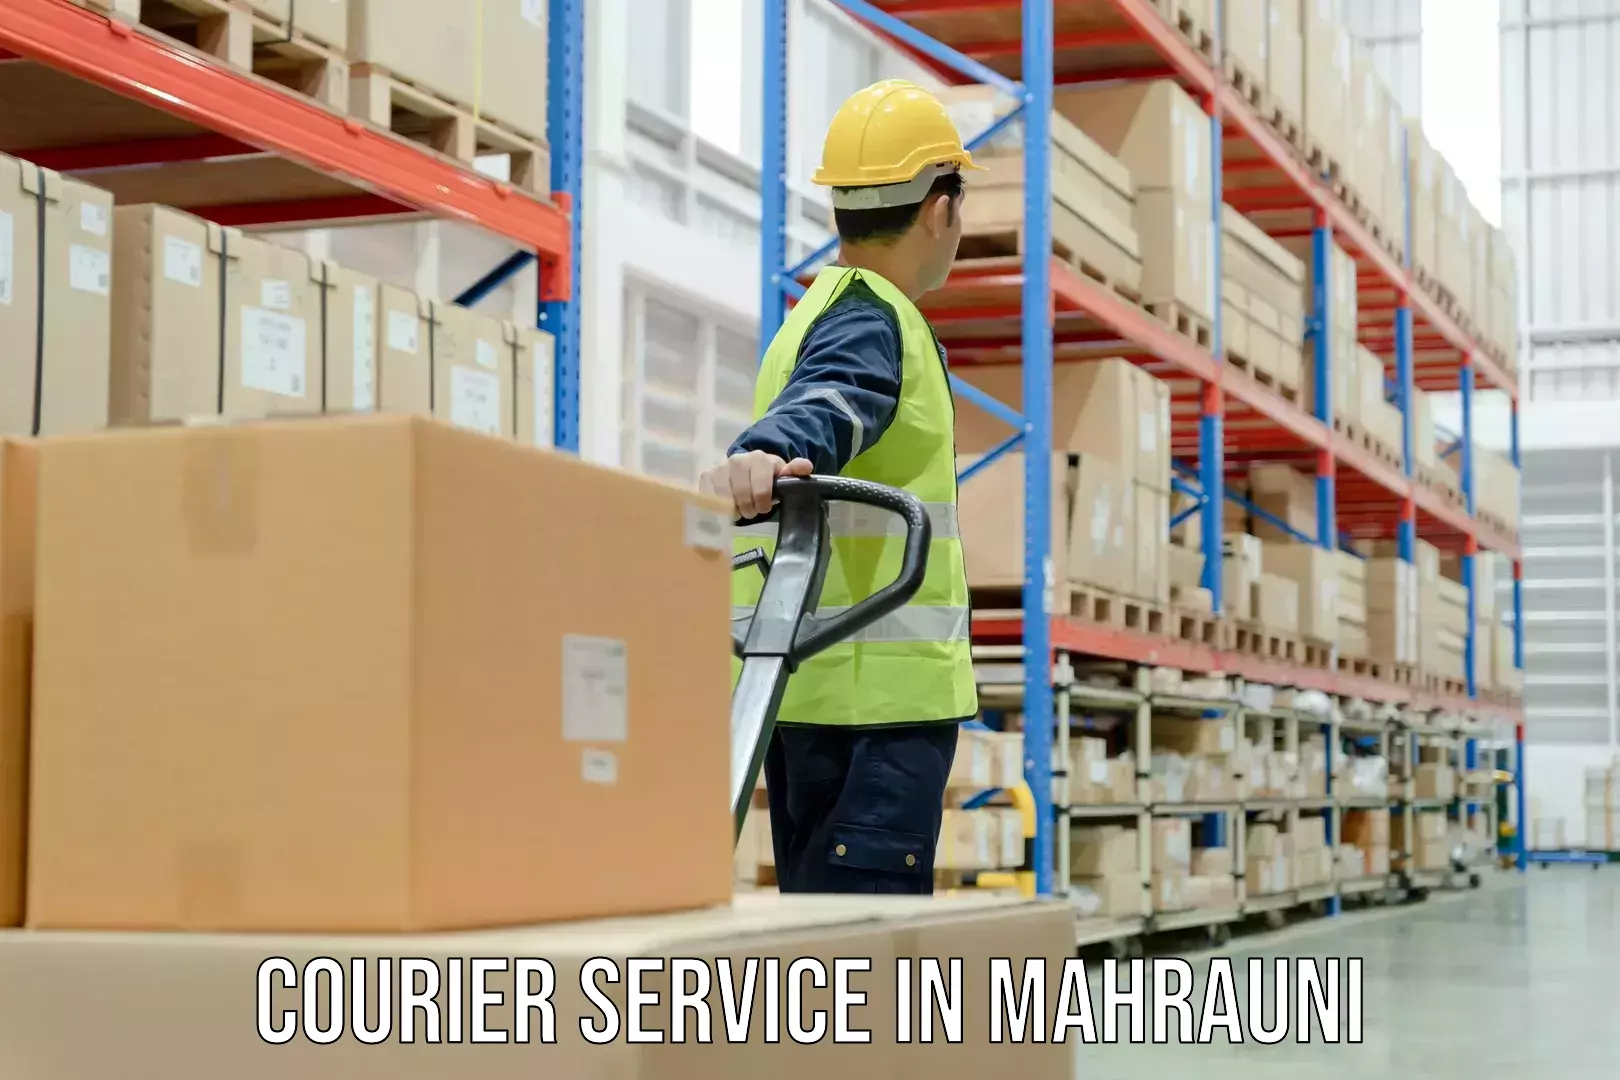 Efficient parcel delivery in Mahrauni